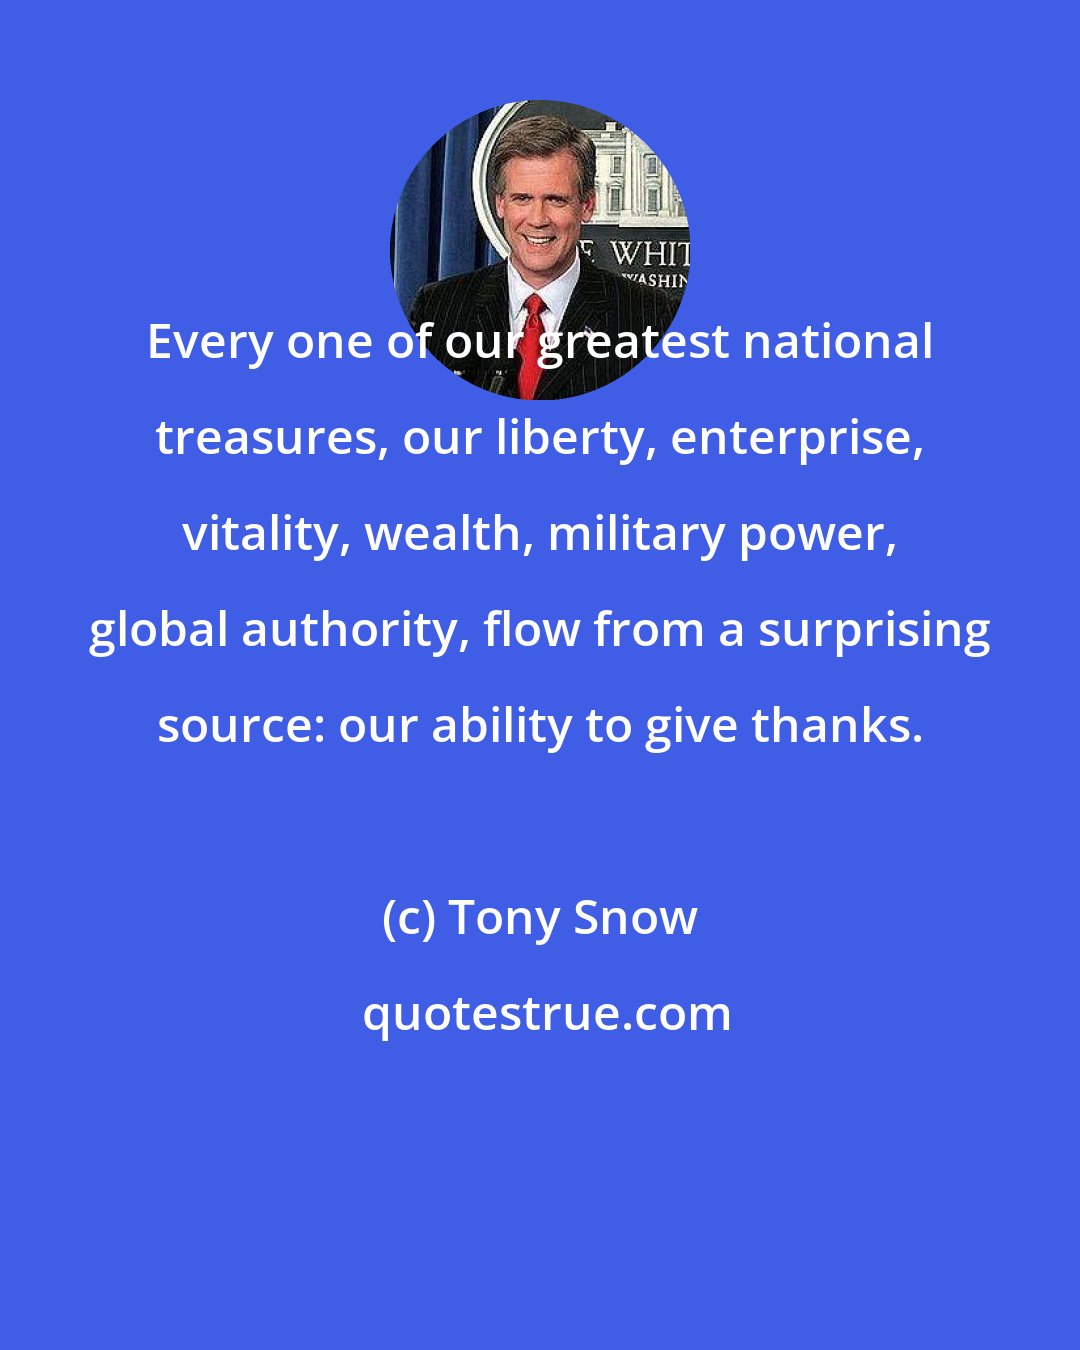 Tony Snow: Every one of our greatest national treasures, our liberty, enterprise, vitality, wealth, military power, global authority, flow from a surprising source: our ability to give thanks.